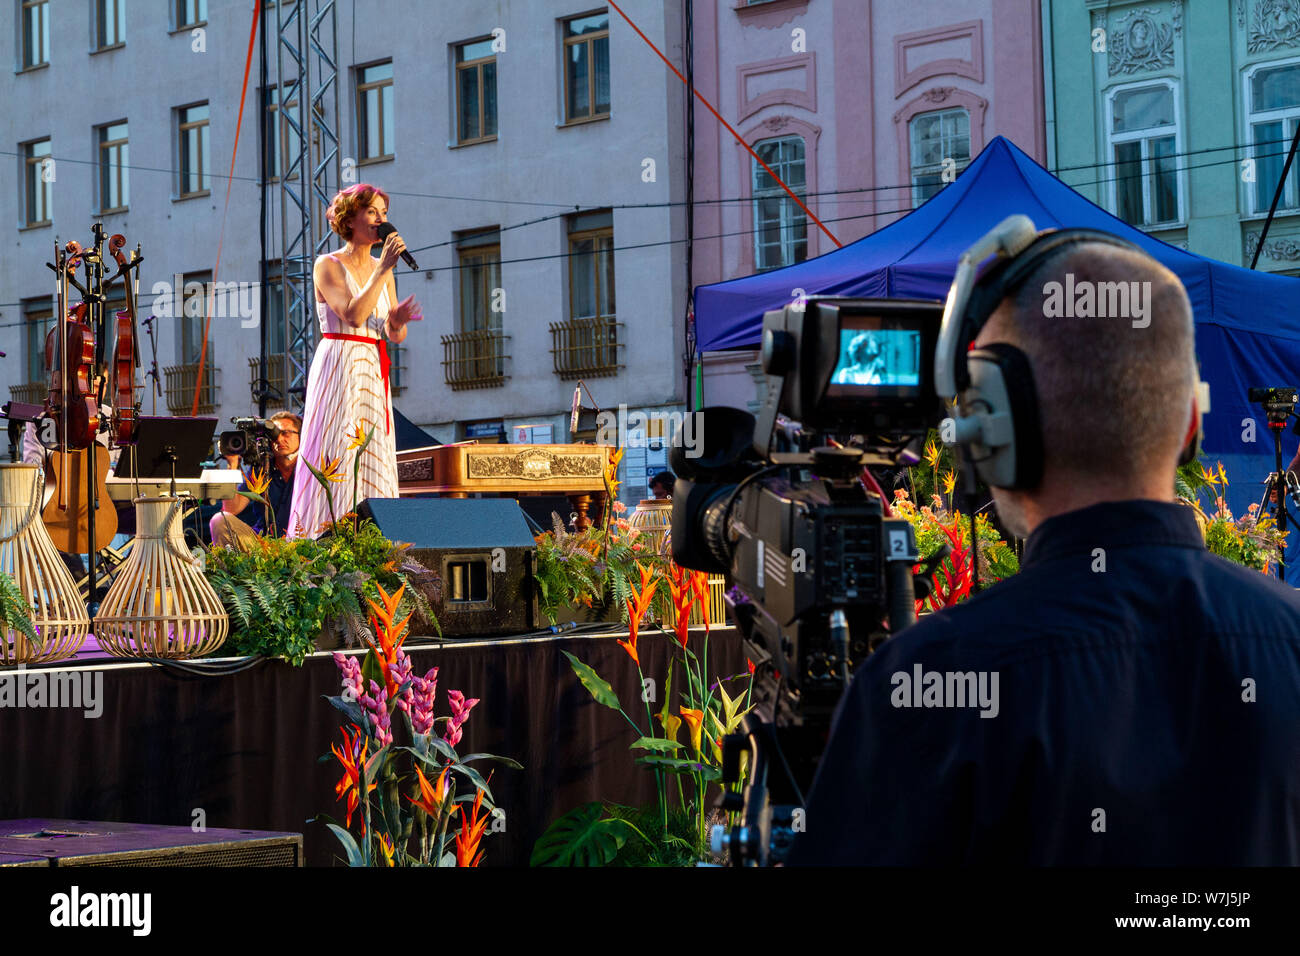 A singer singing on an outdoor stage during a benefit concert. A cameraman is shooting the event live. Stock Photo